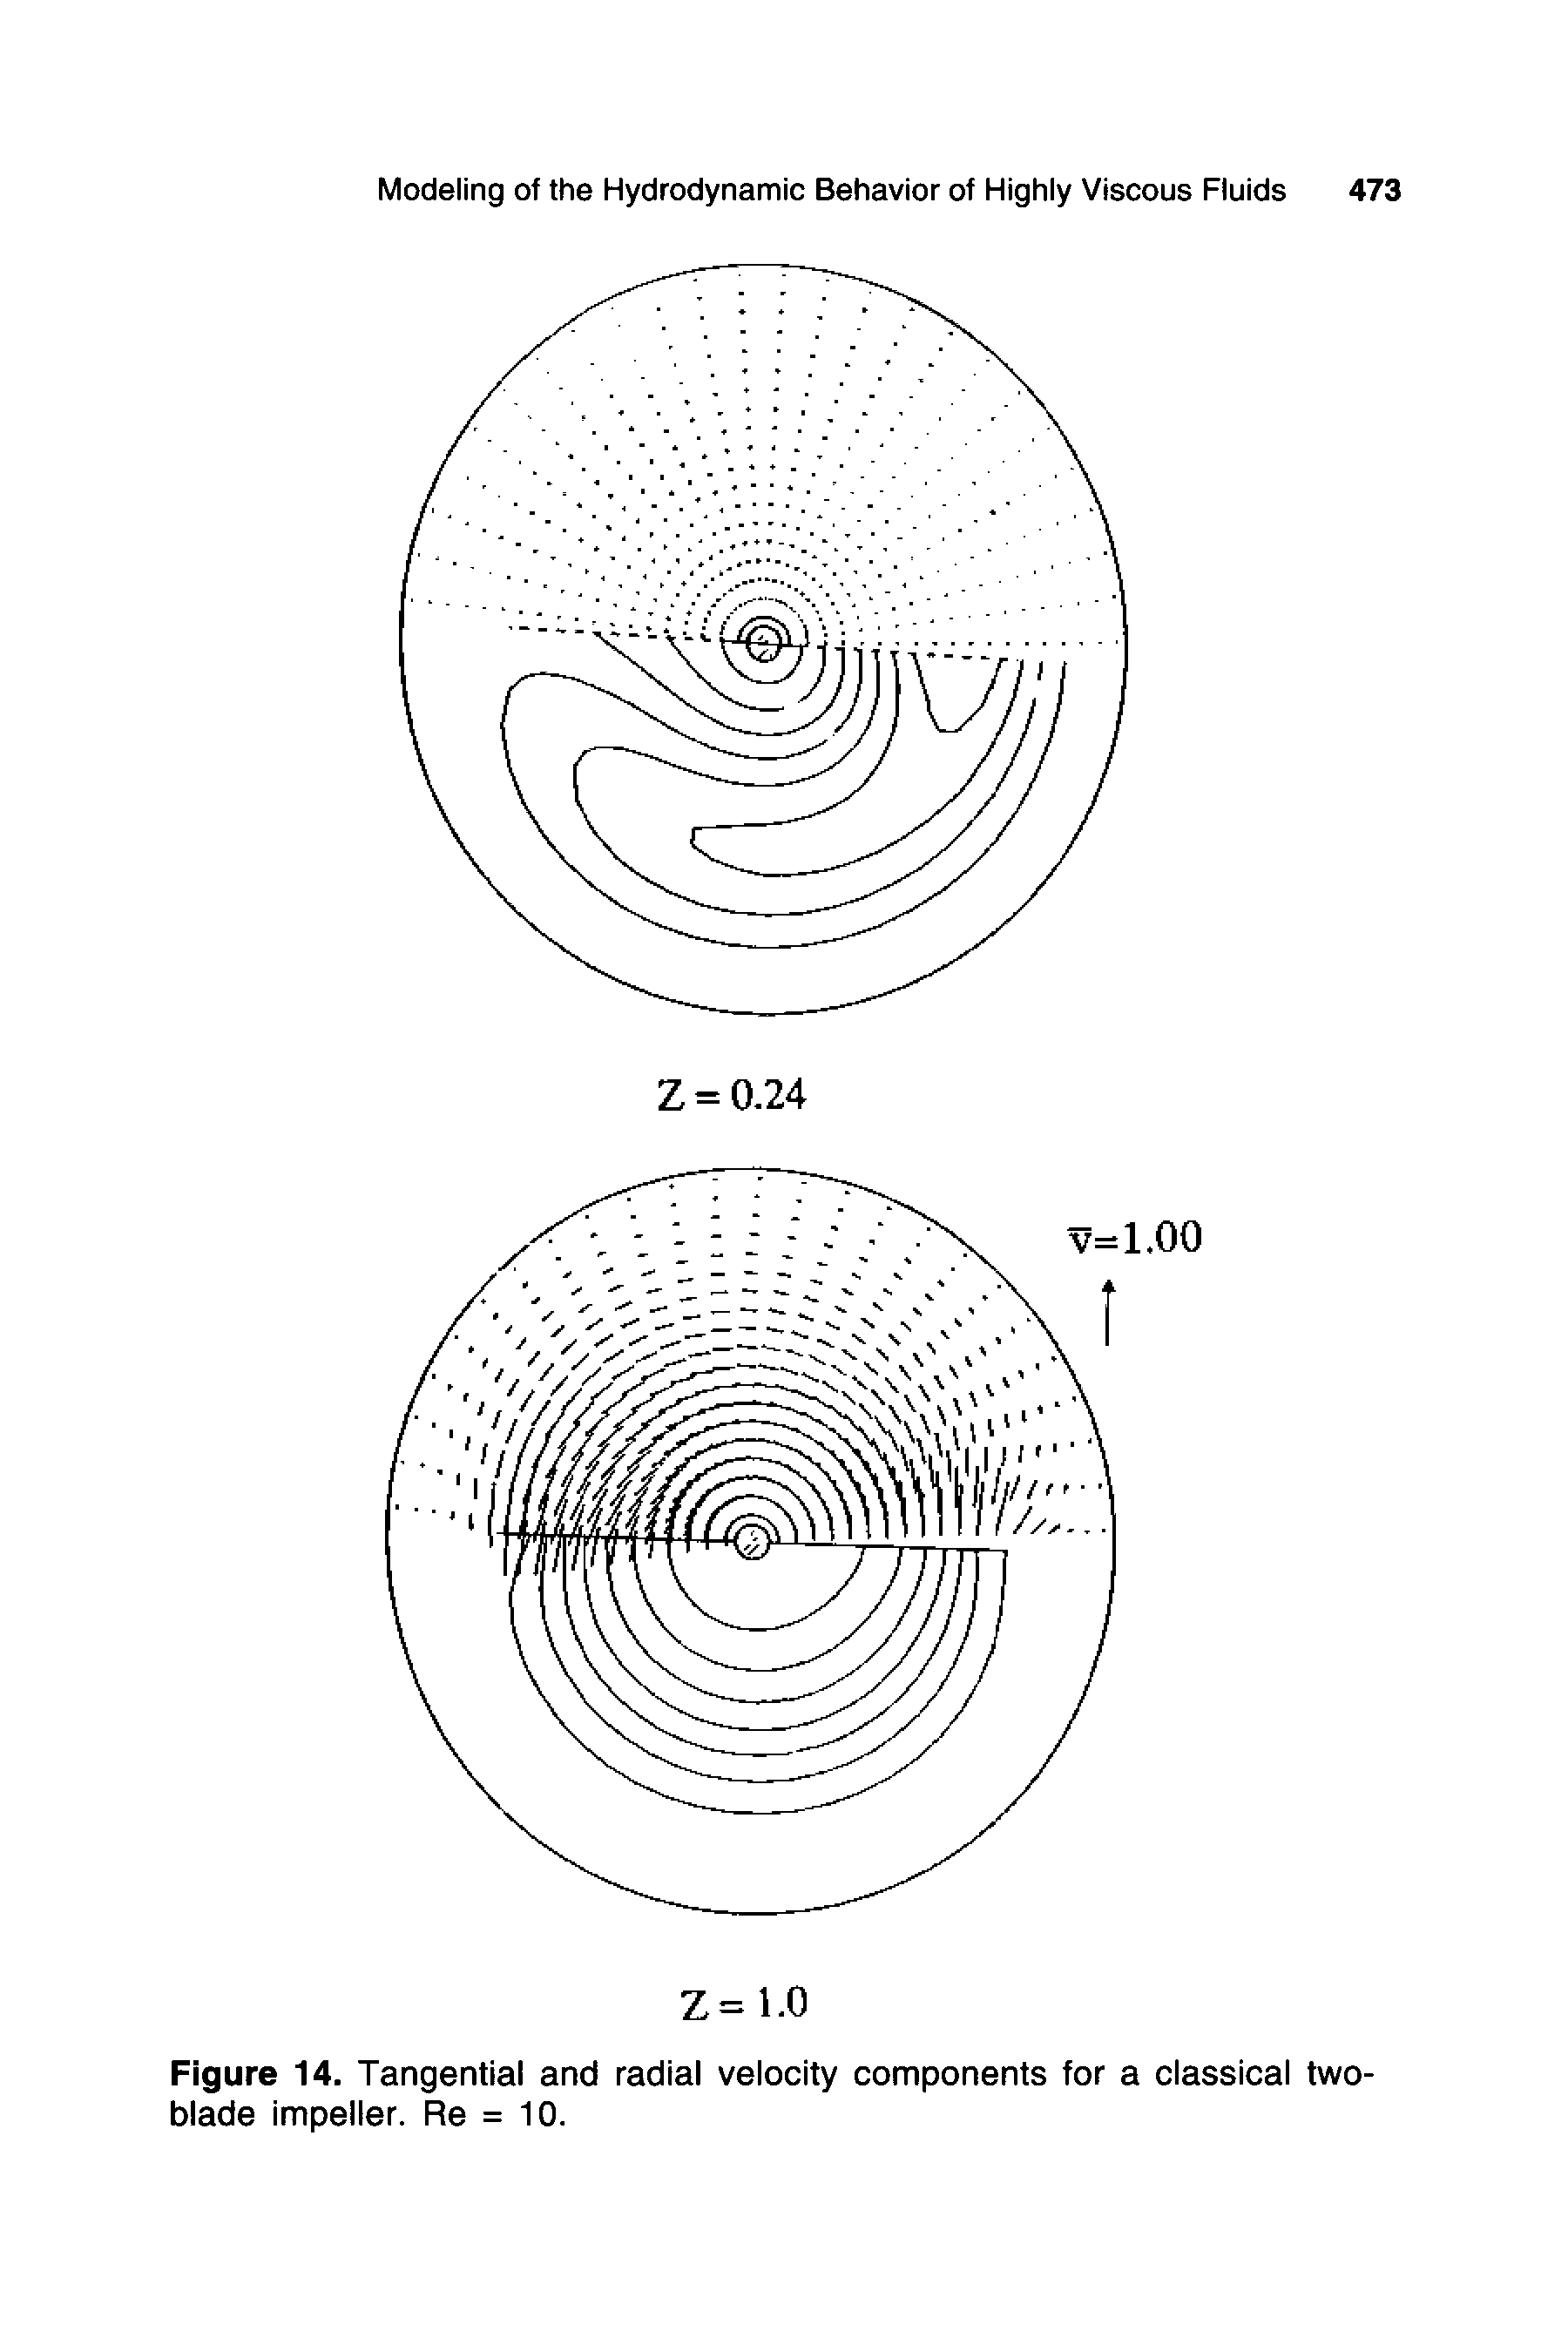 Figure 14. Tangential and radial velocity components for a classical two-blade impeller. Re = 10.